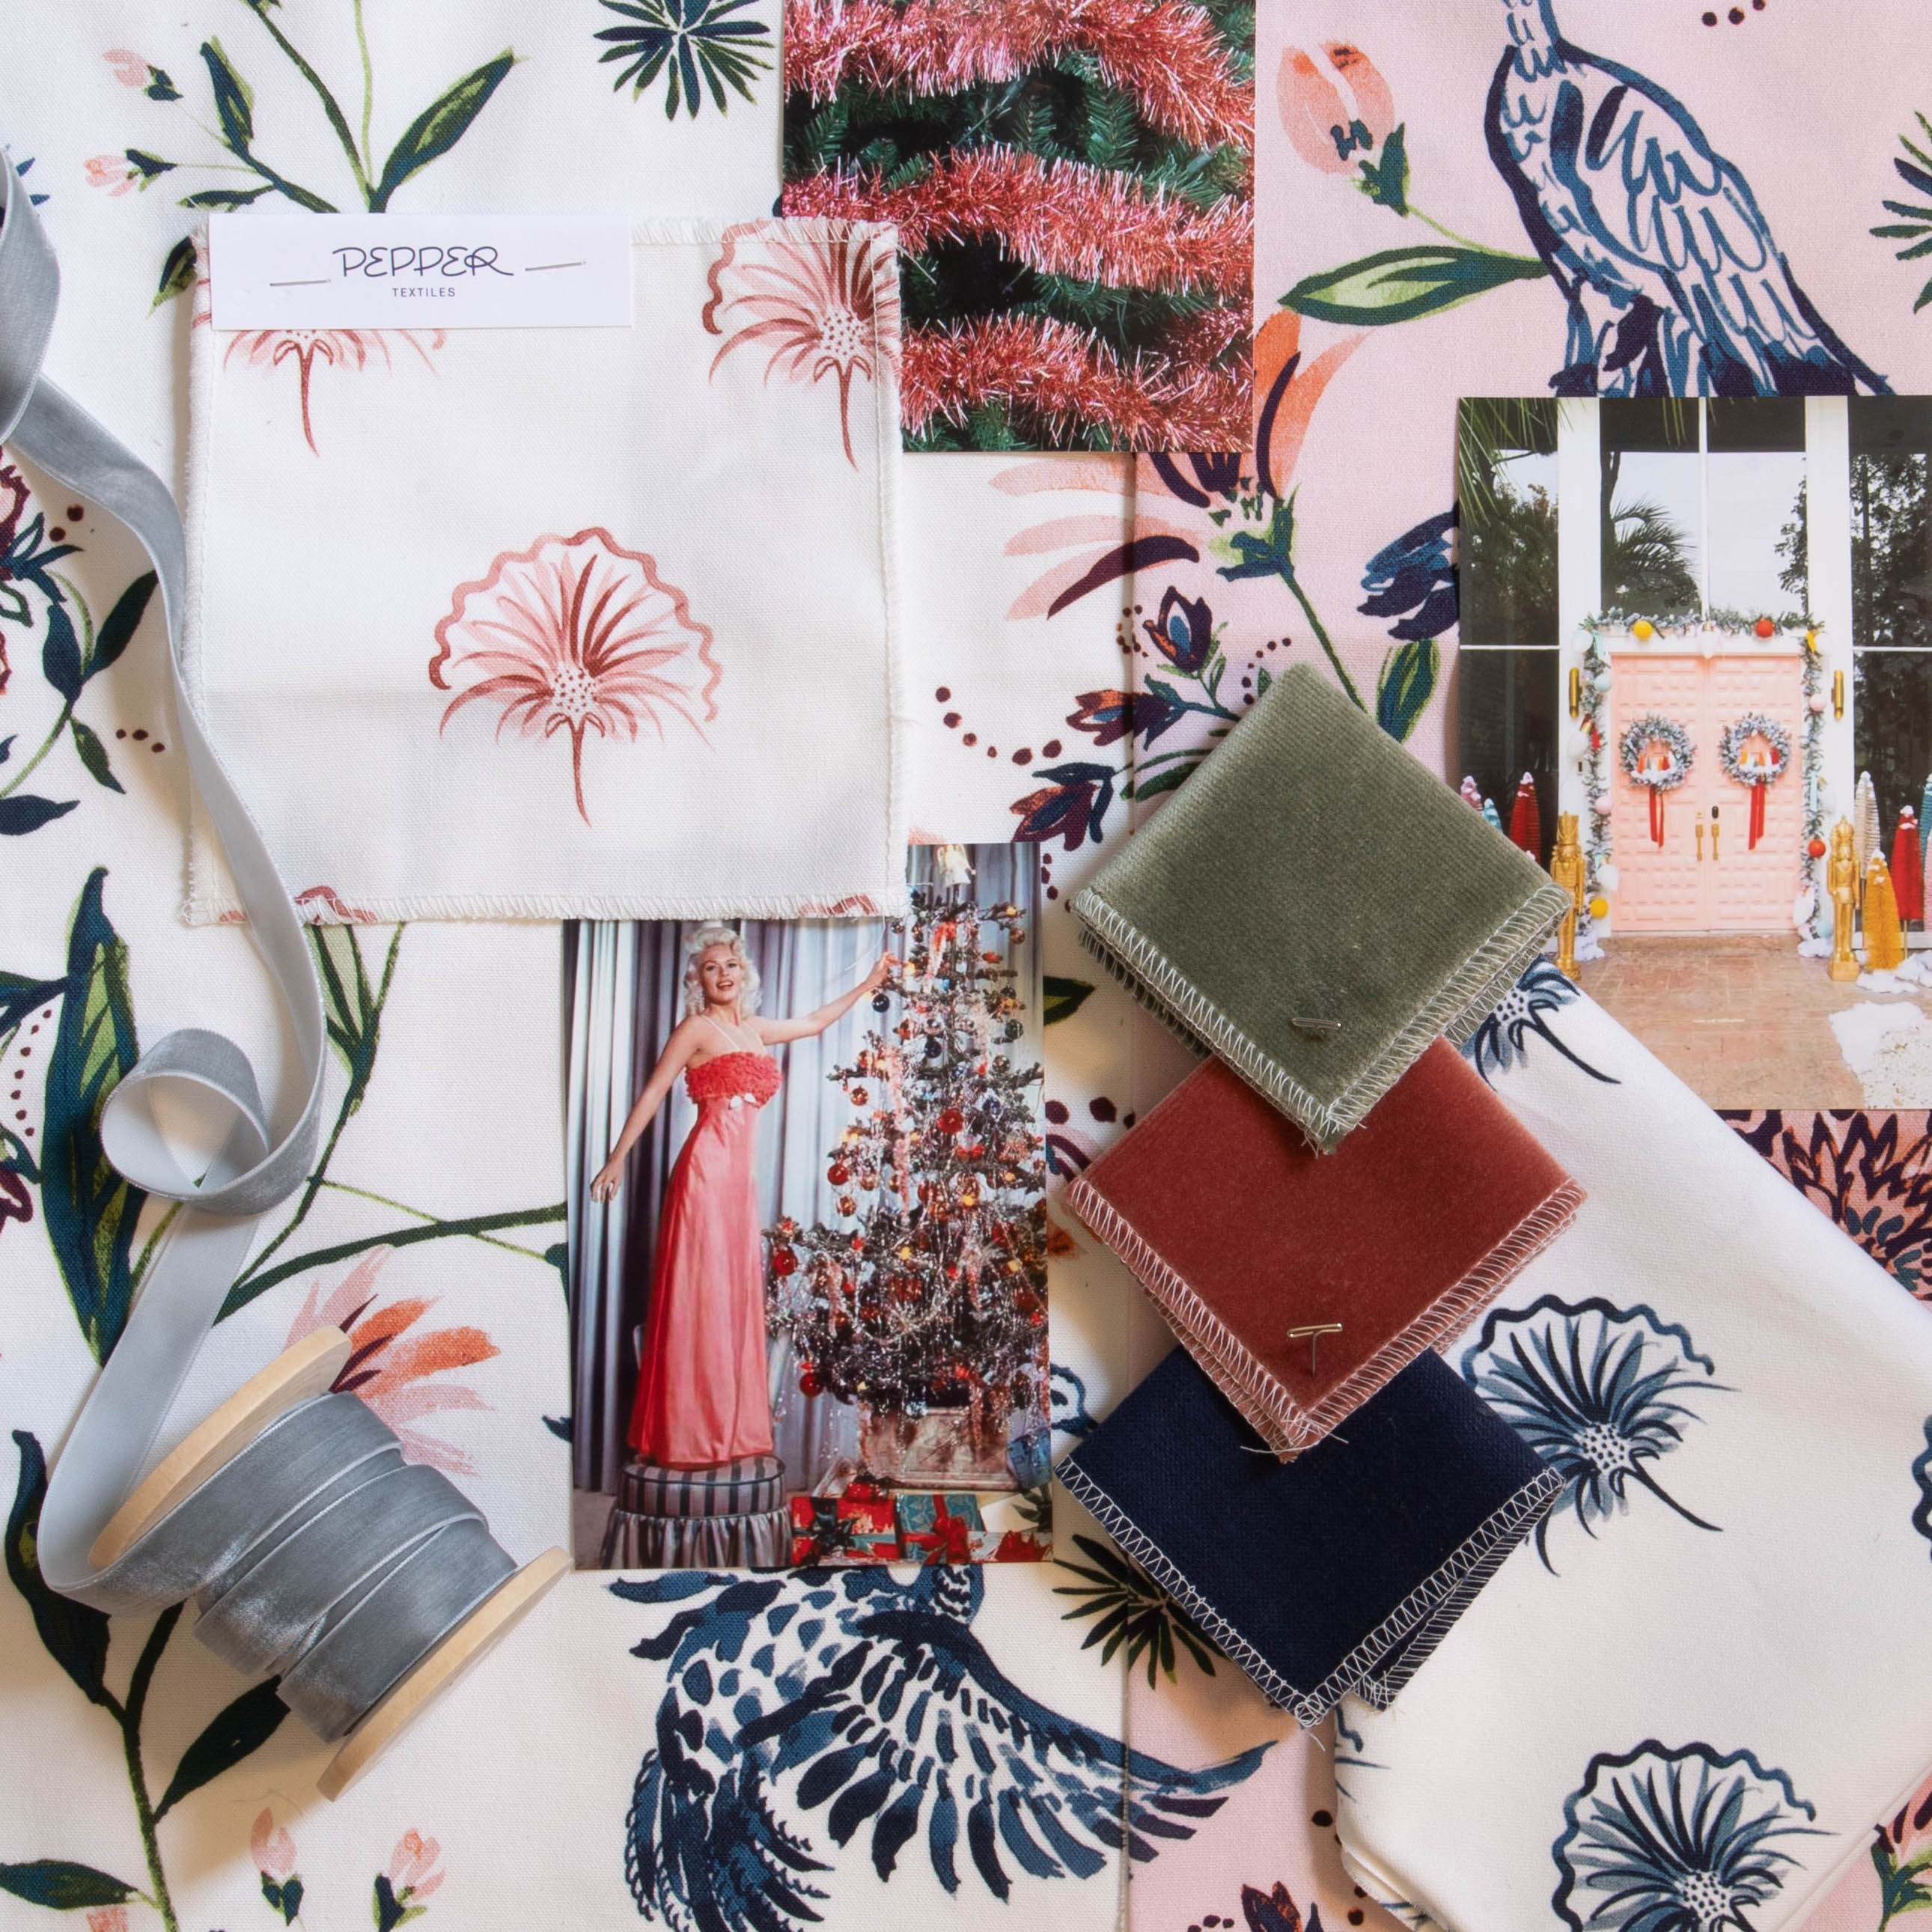 Interior design moodboard and fabric inspirations with Coral Velvet swatch, Floral Pink printed cotton swatch, Floral Navy printed cotton swatch, and Navy Blue cotton swatch